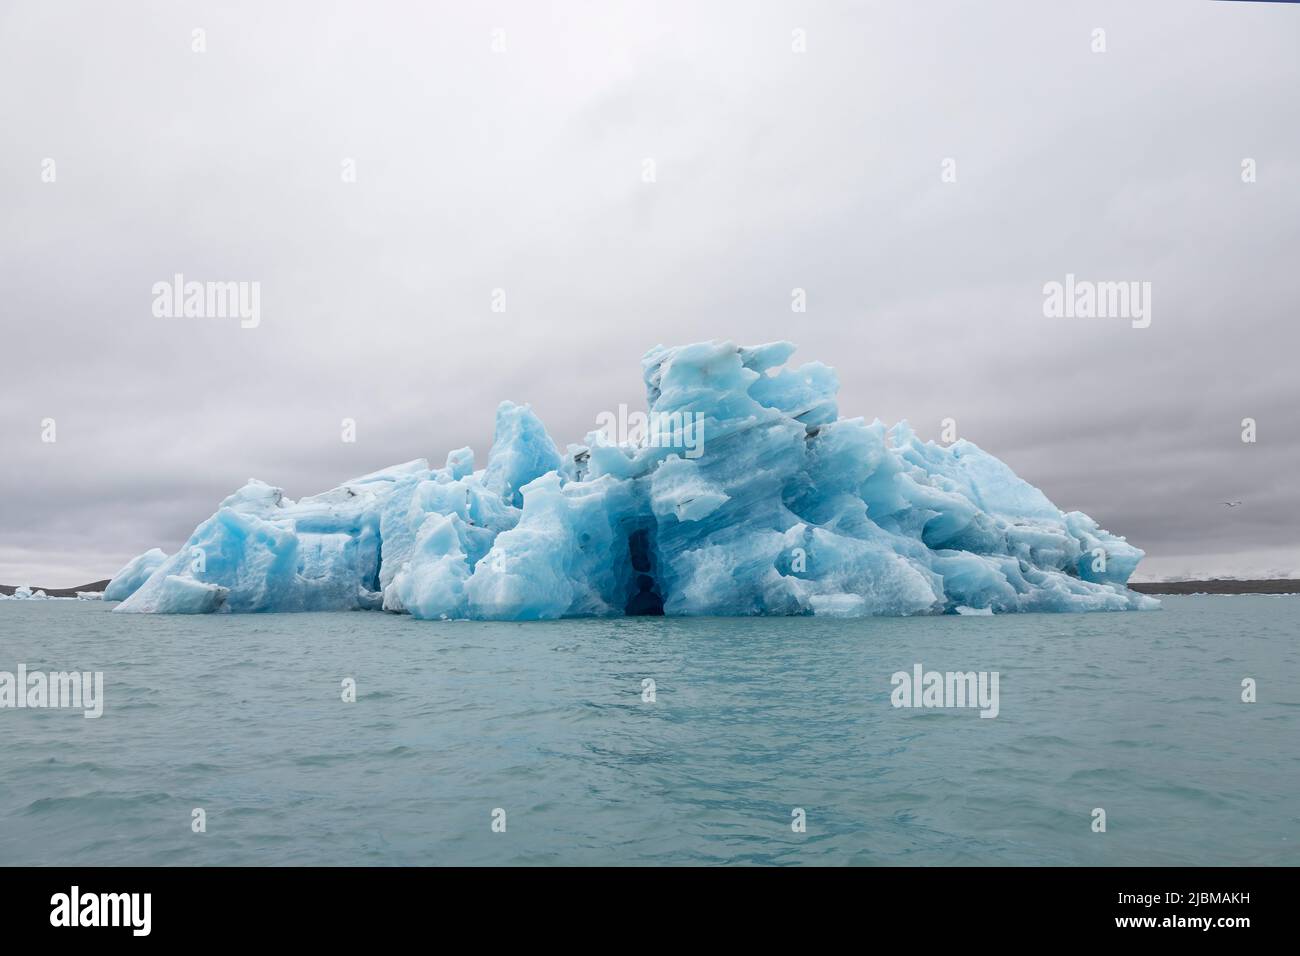 Icebergs and ice floes that have calved off the Jokulsarlon glacier Stock Photo